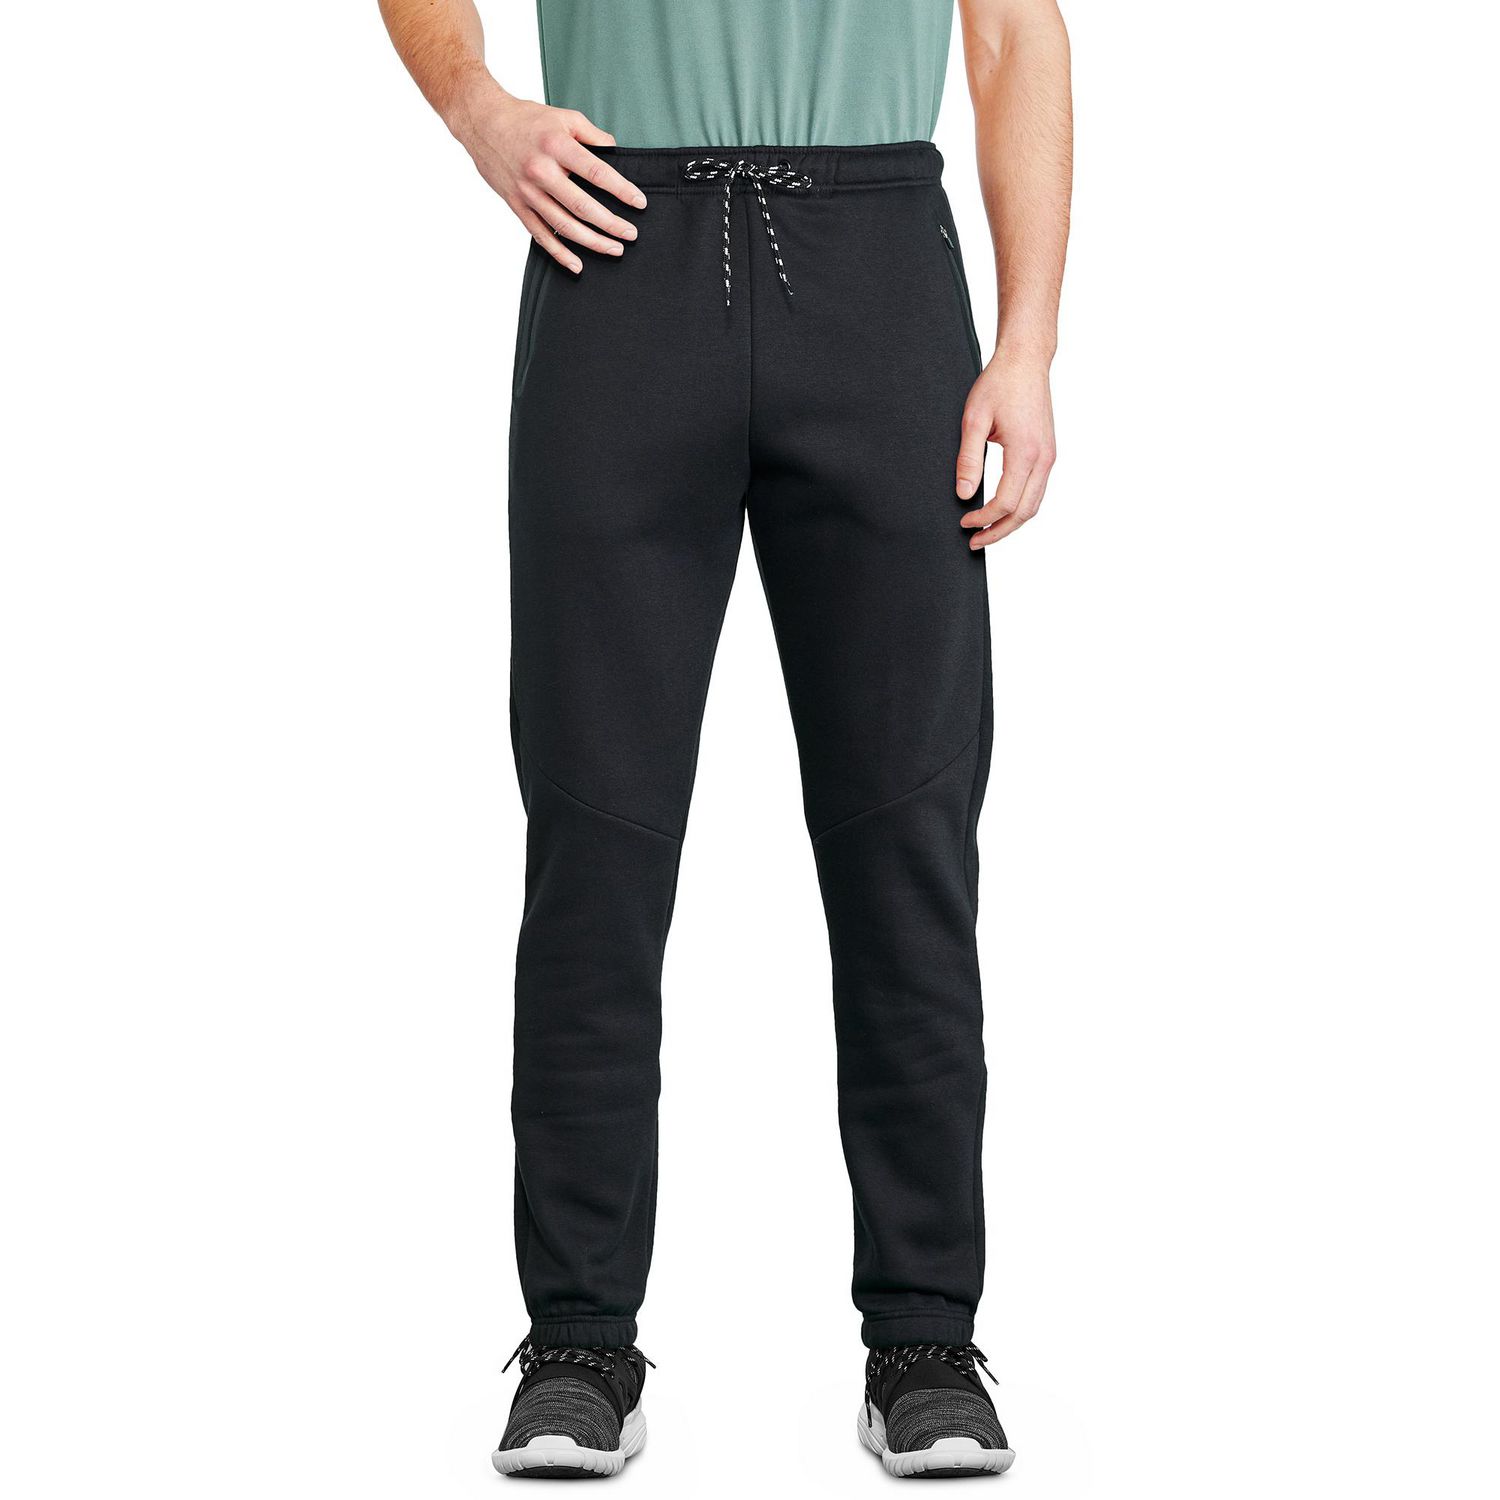 Athletic Works Athleisure Commuter Pants Bundle  Athletic works,  Streetwear fashion, Athleisure